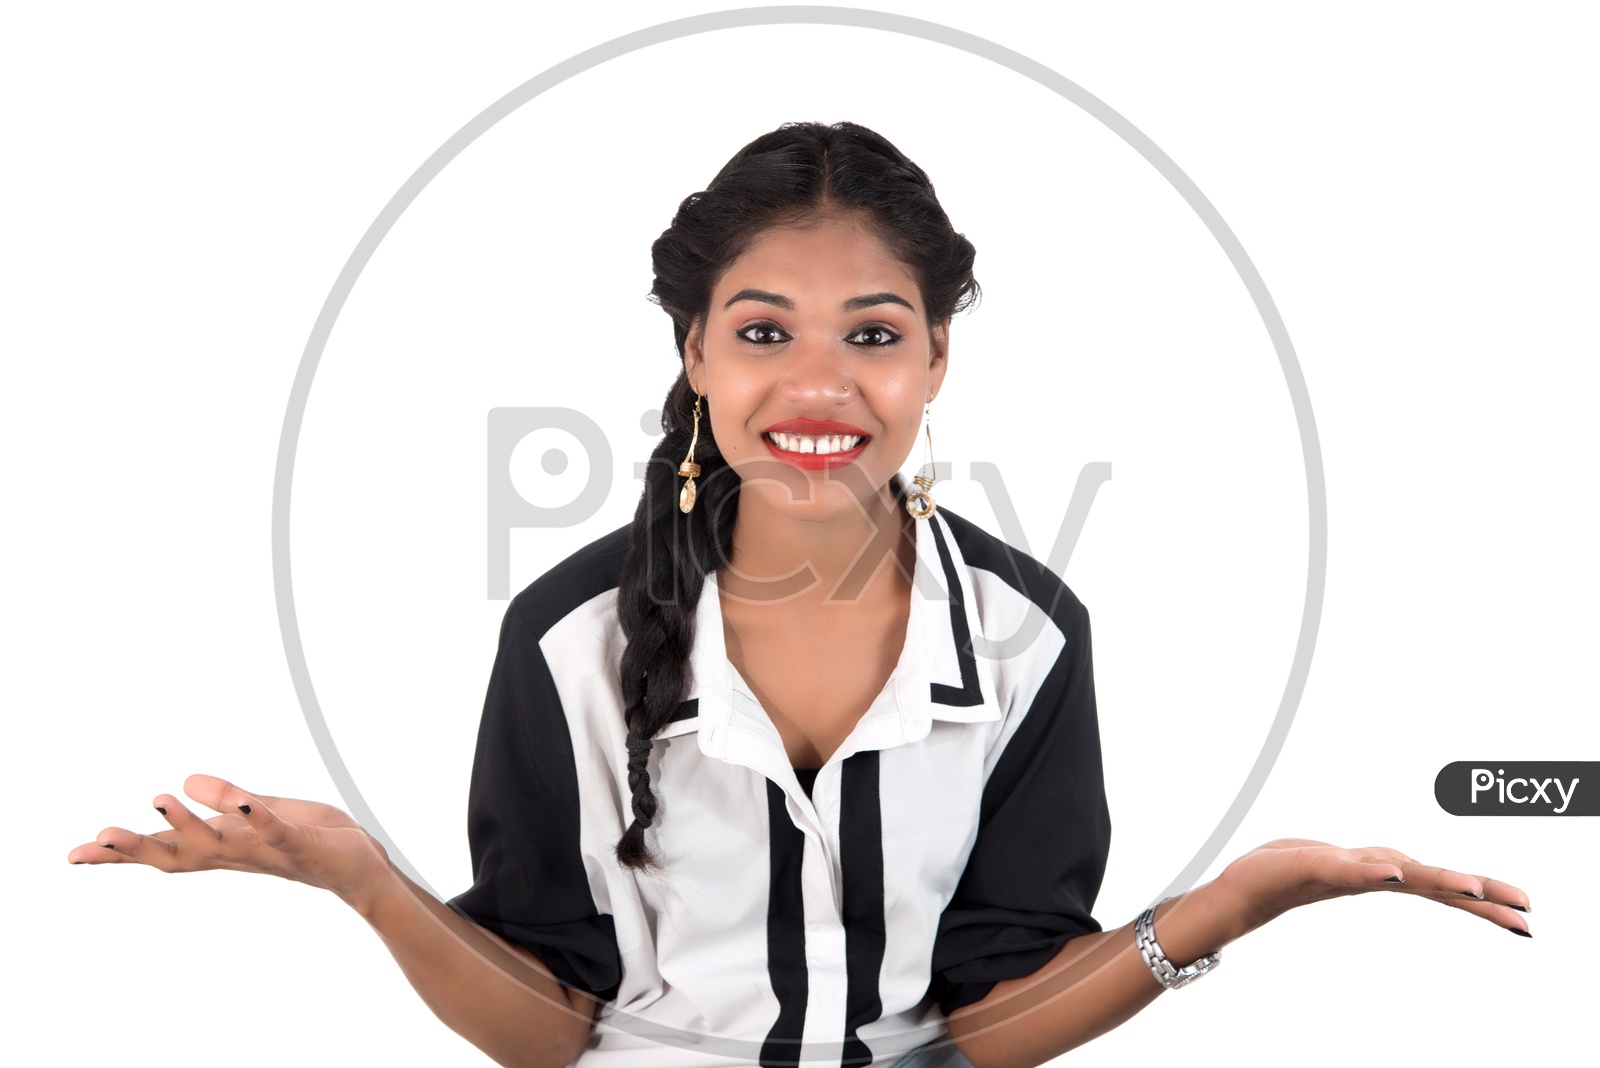 Pretty Young Indian Girl With Gesture and Smile on Face And Posing On an Isolated White Background